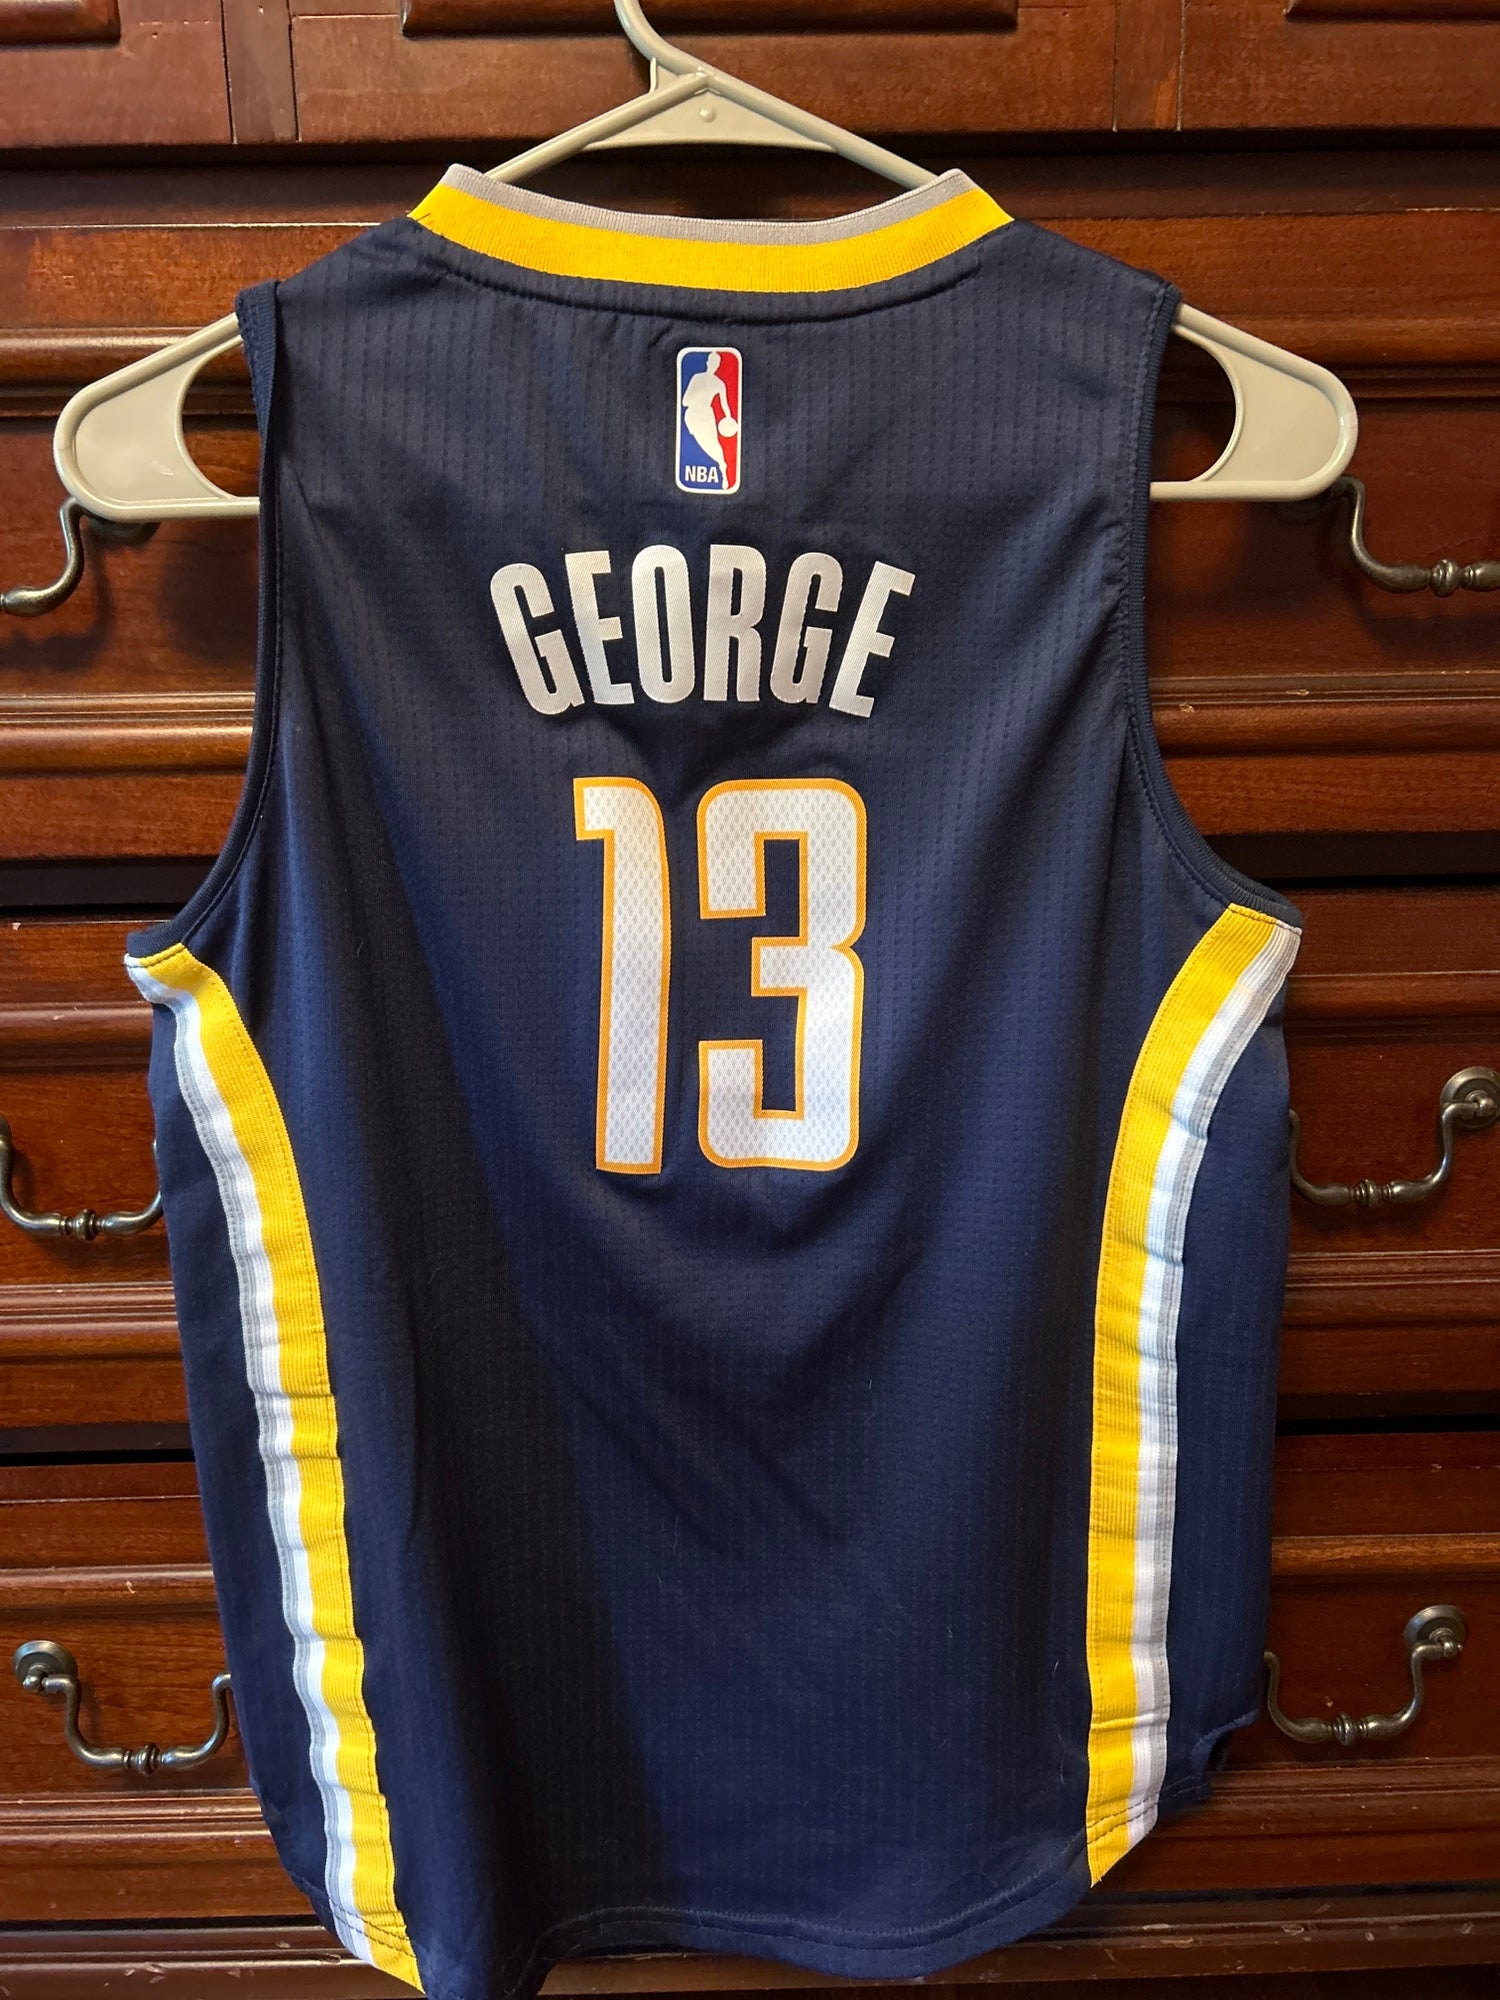 paul george jersey youth